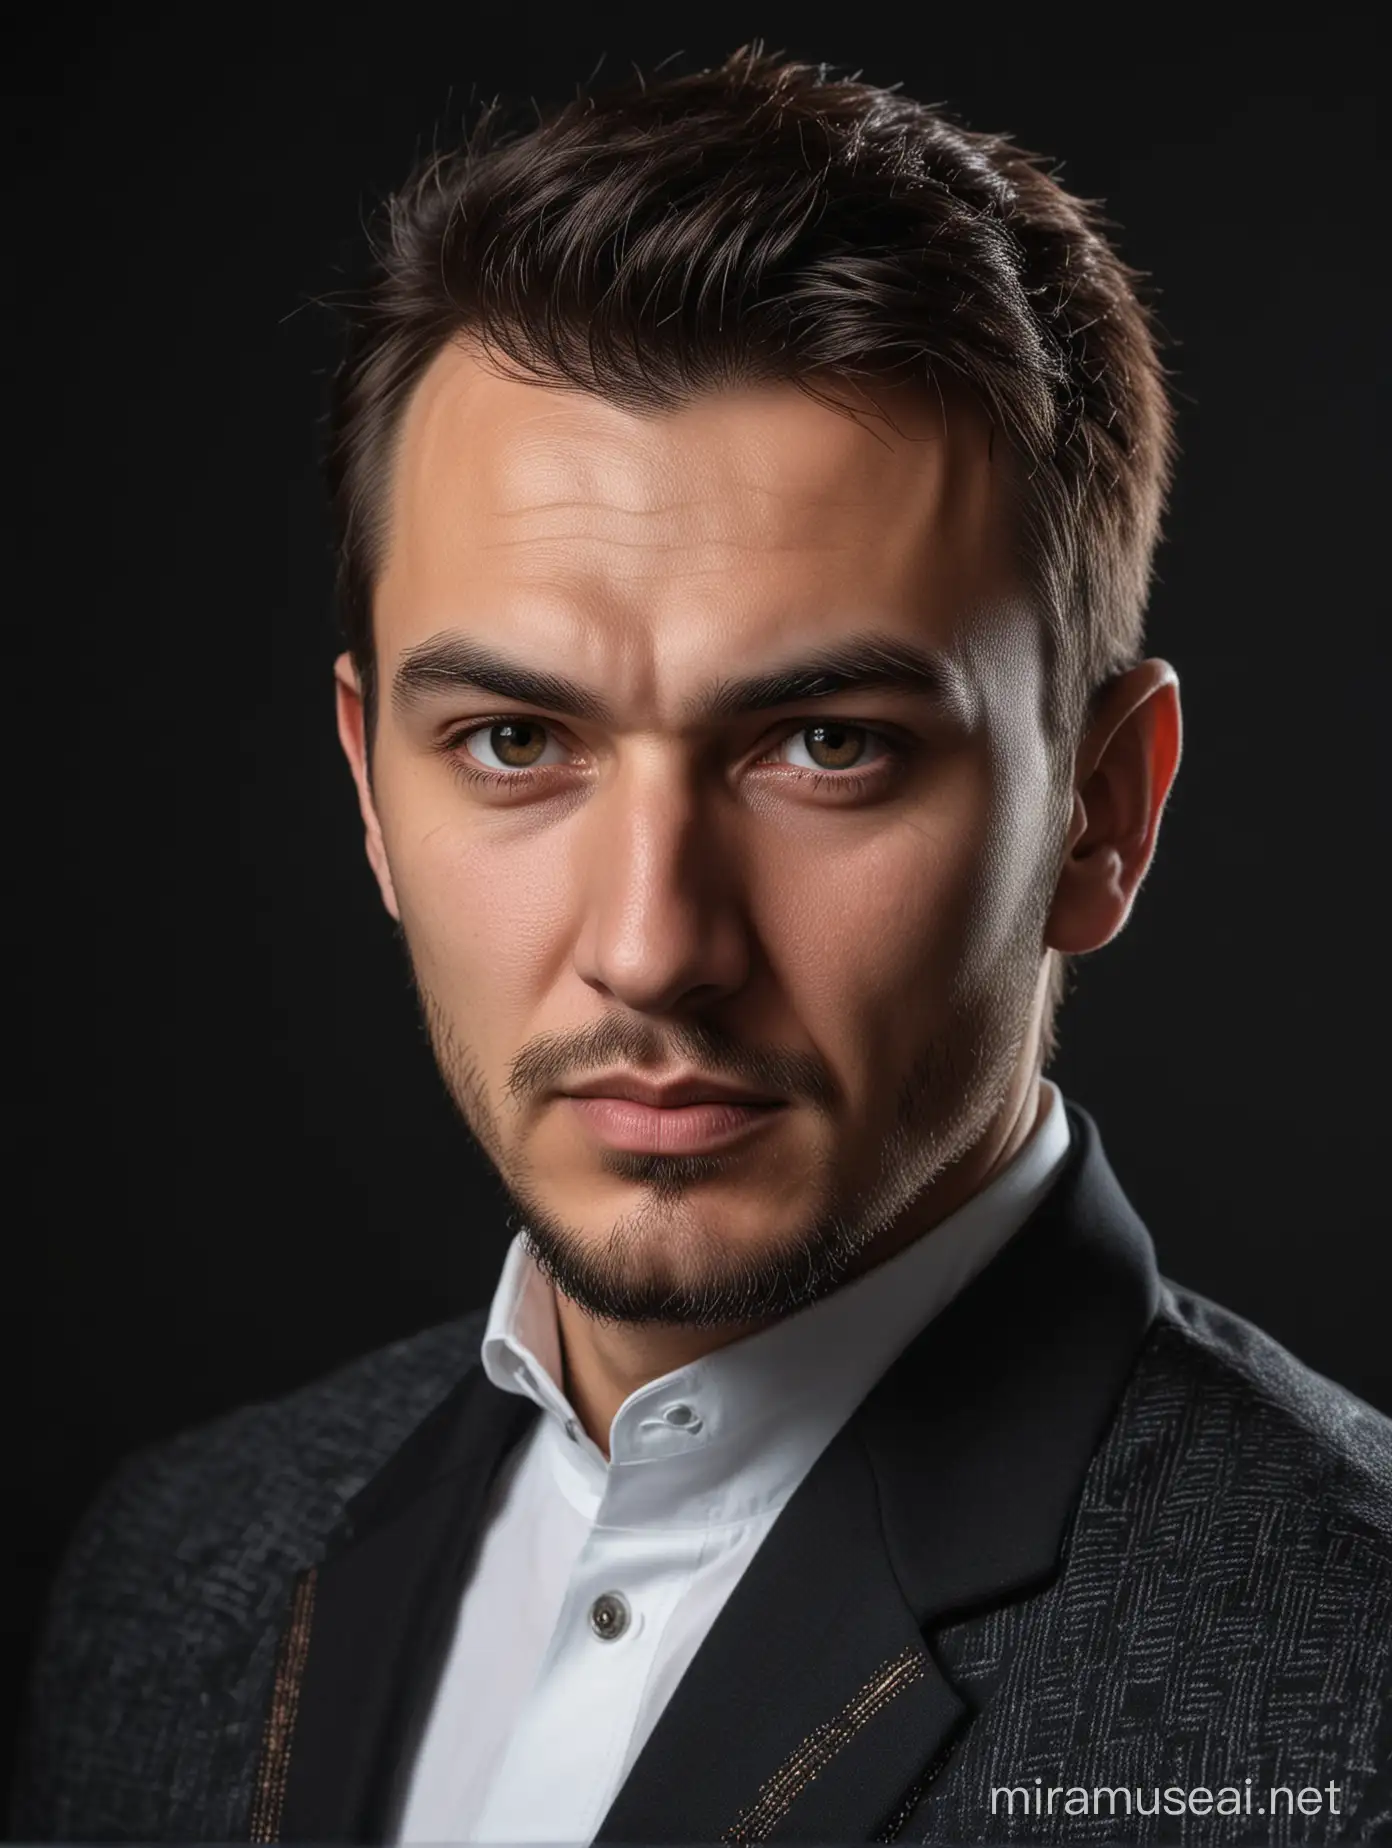 Tatar Man in Jacket and White Shirt on Black Background